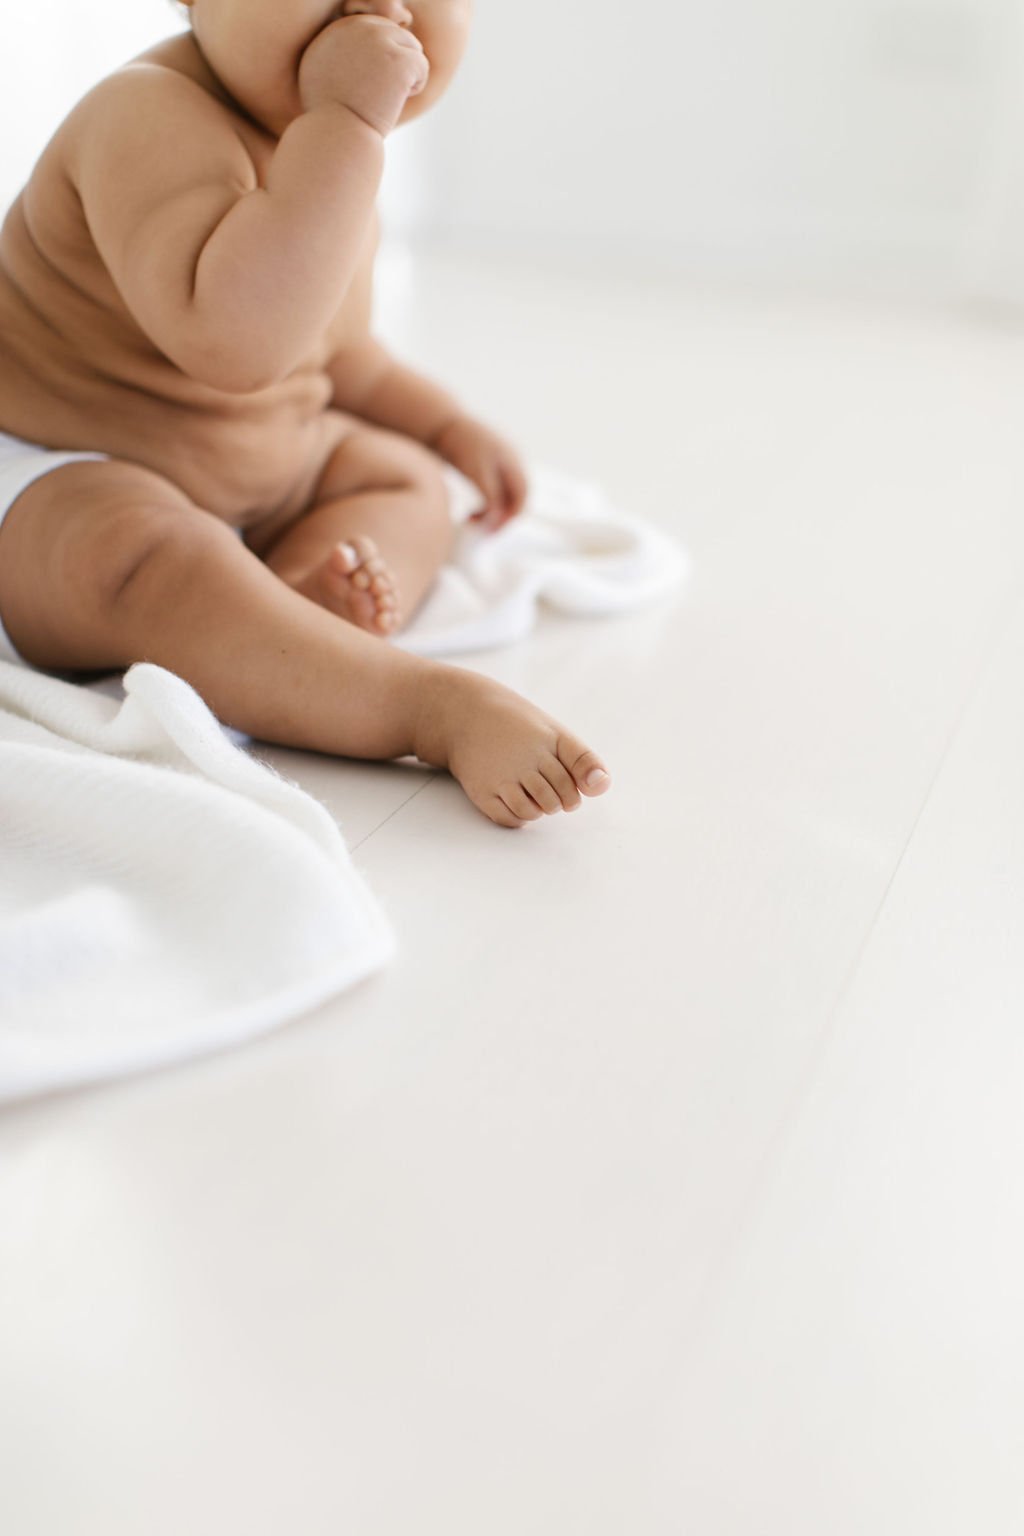 close up photo of baby's tiny feet in a white photography studio 